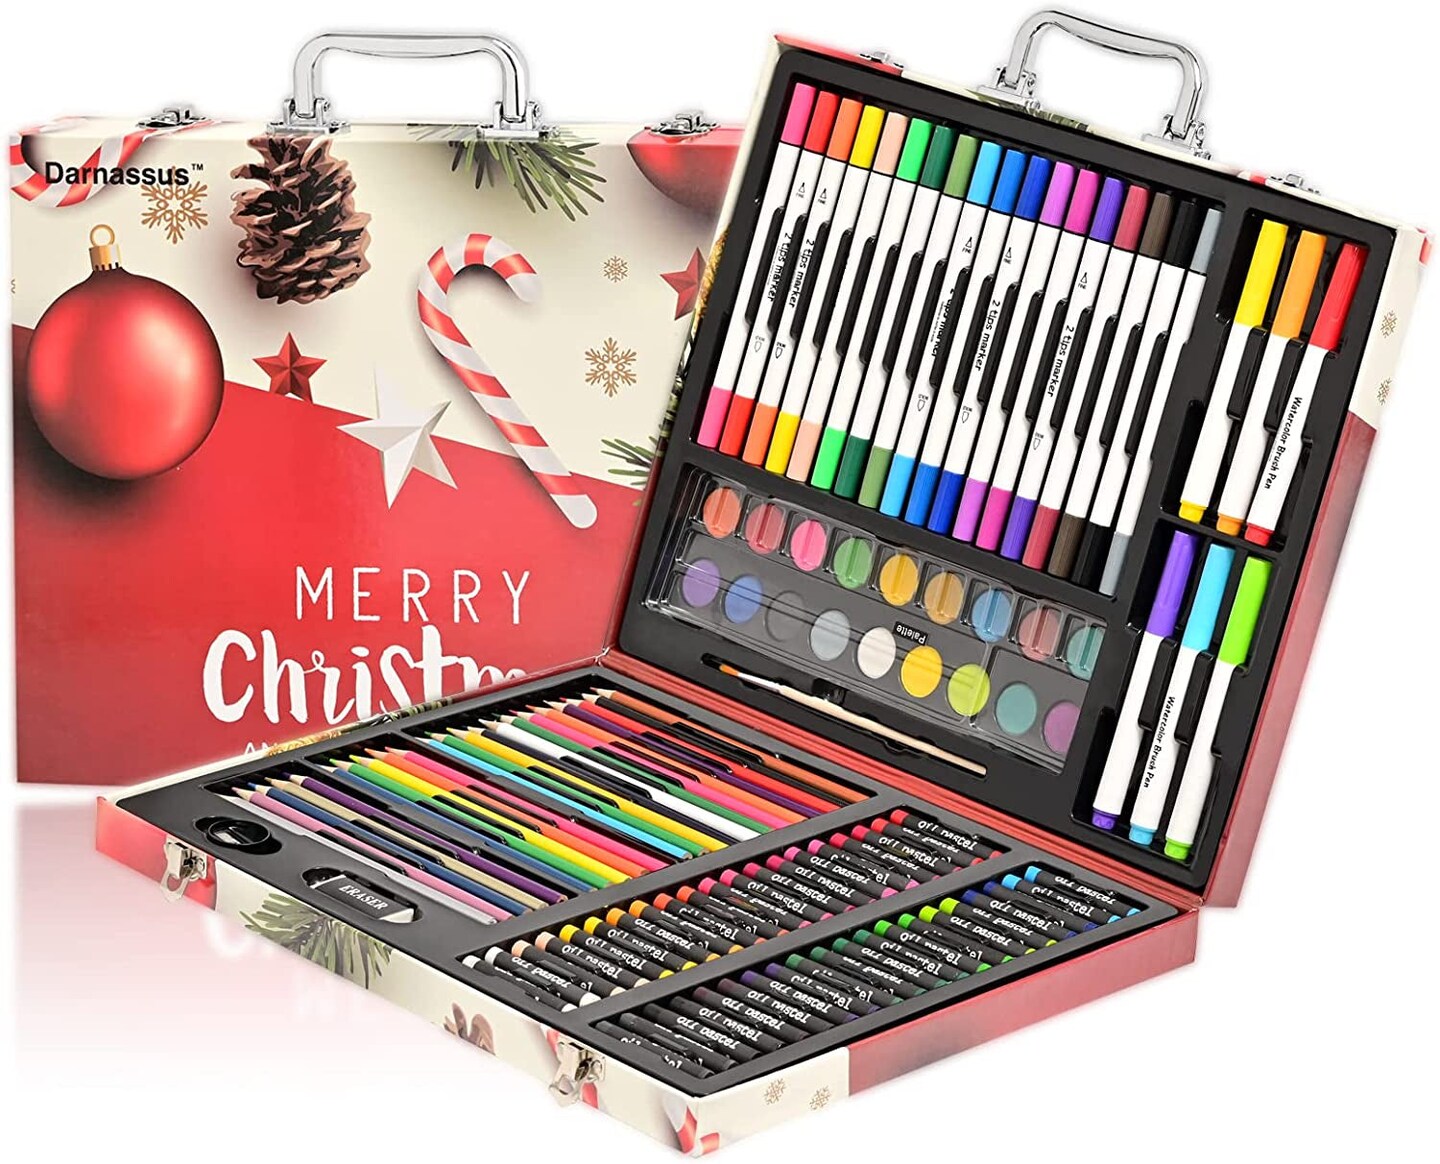 132-Piece Art Set, Inspiration Art Case Coloring Set, Deluxe Professional  Color Set, Art Kit Gift for Age 4-12, with Compact Portable Case